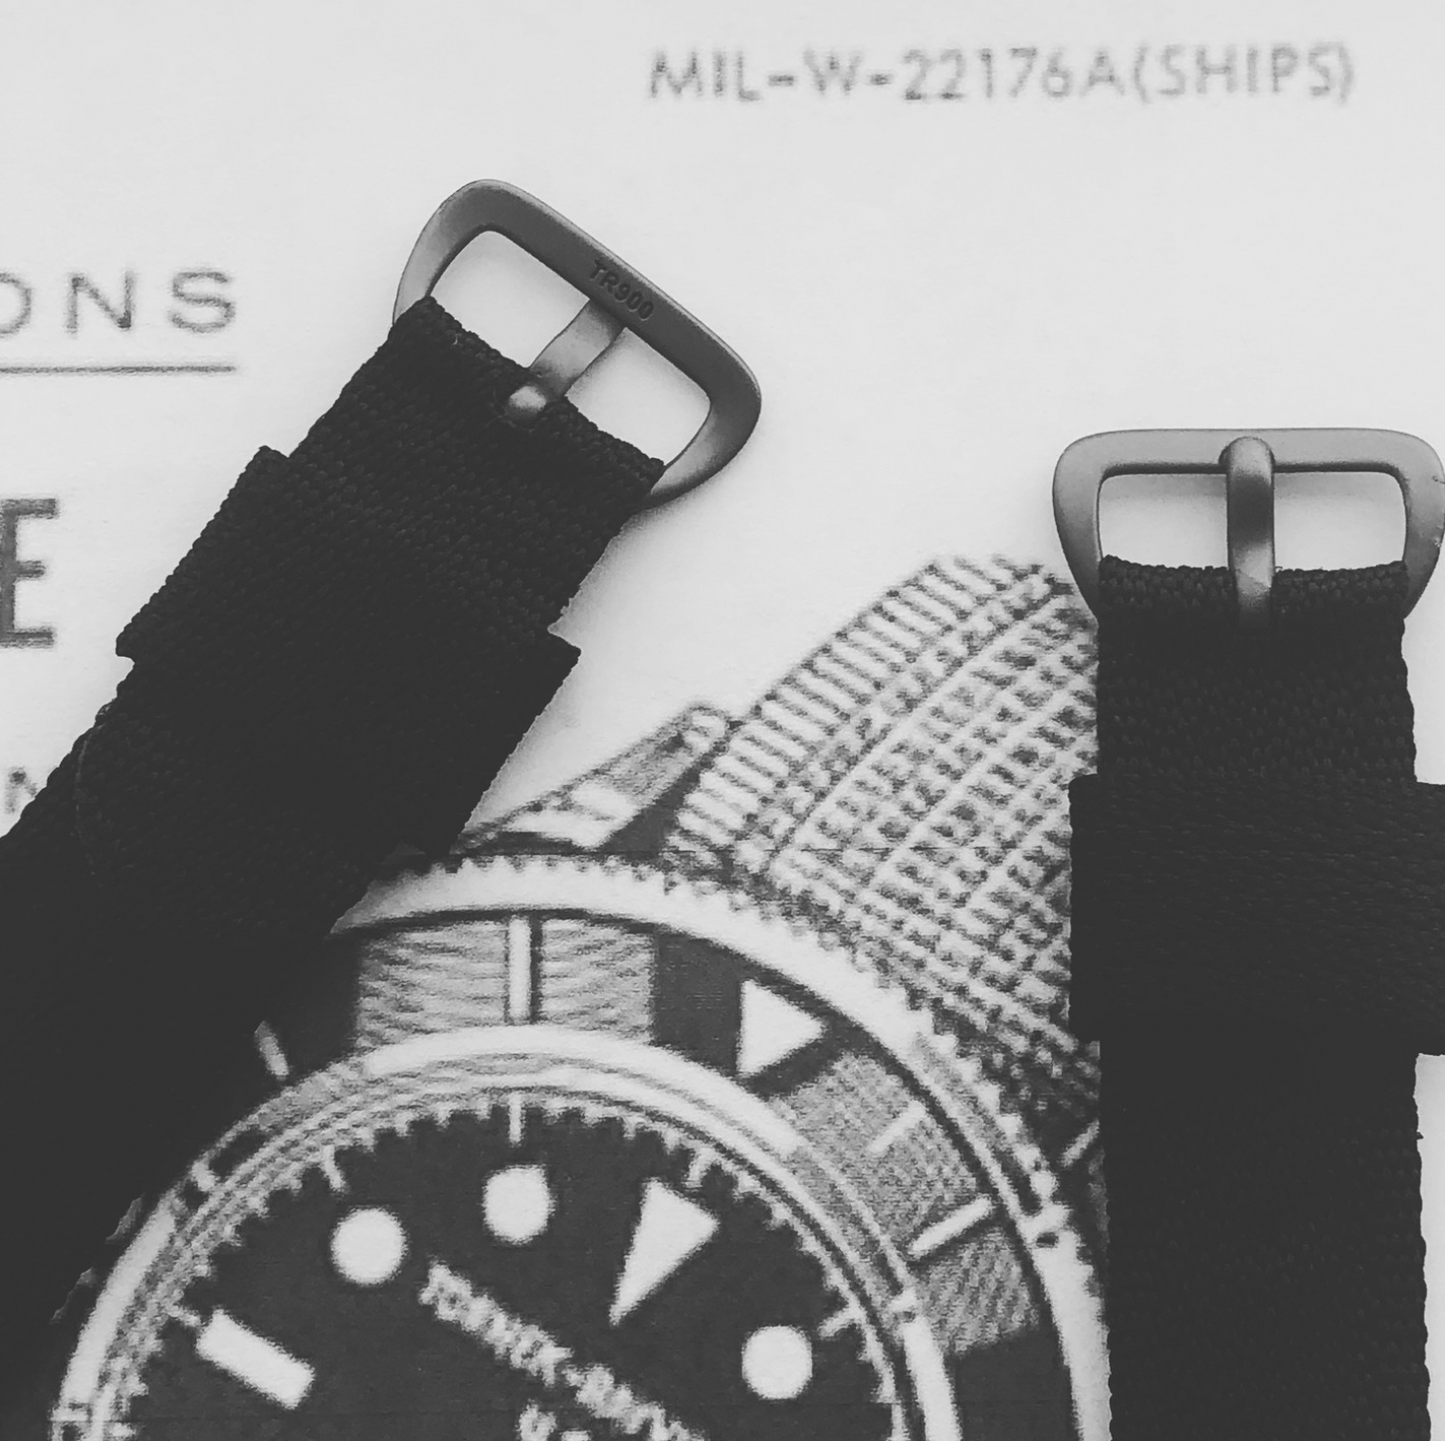 TR-900 STRAP, THE MILSPEC STRAP FOR 1960’S DIVE WATCHES